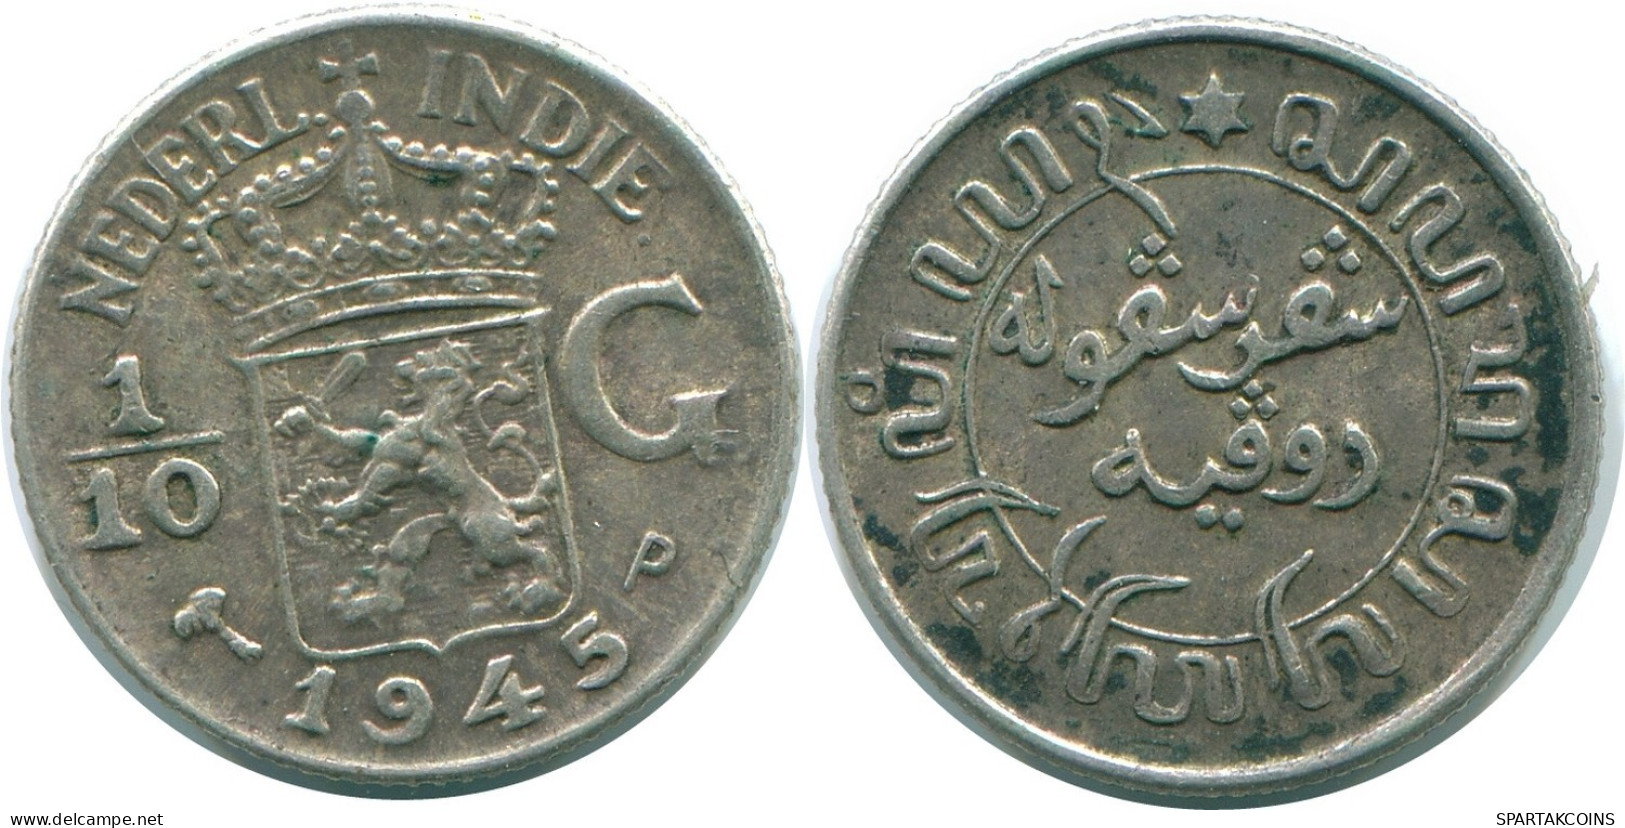 1/10 GULDEN 1945 P NETHERLANDS EAST INDIES SILVER Colonial Coin #NL14194.3.U.A - Dutch East Indies